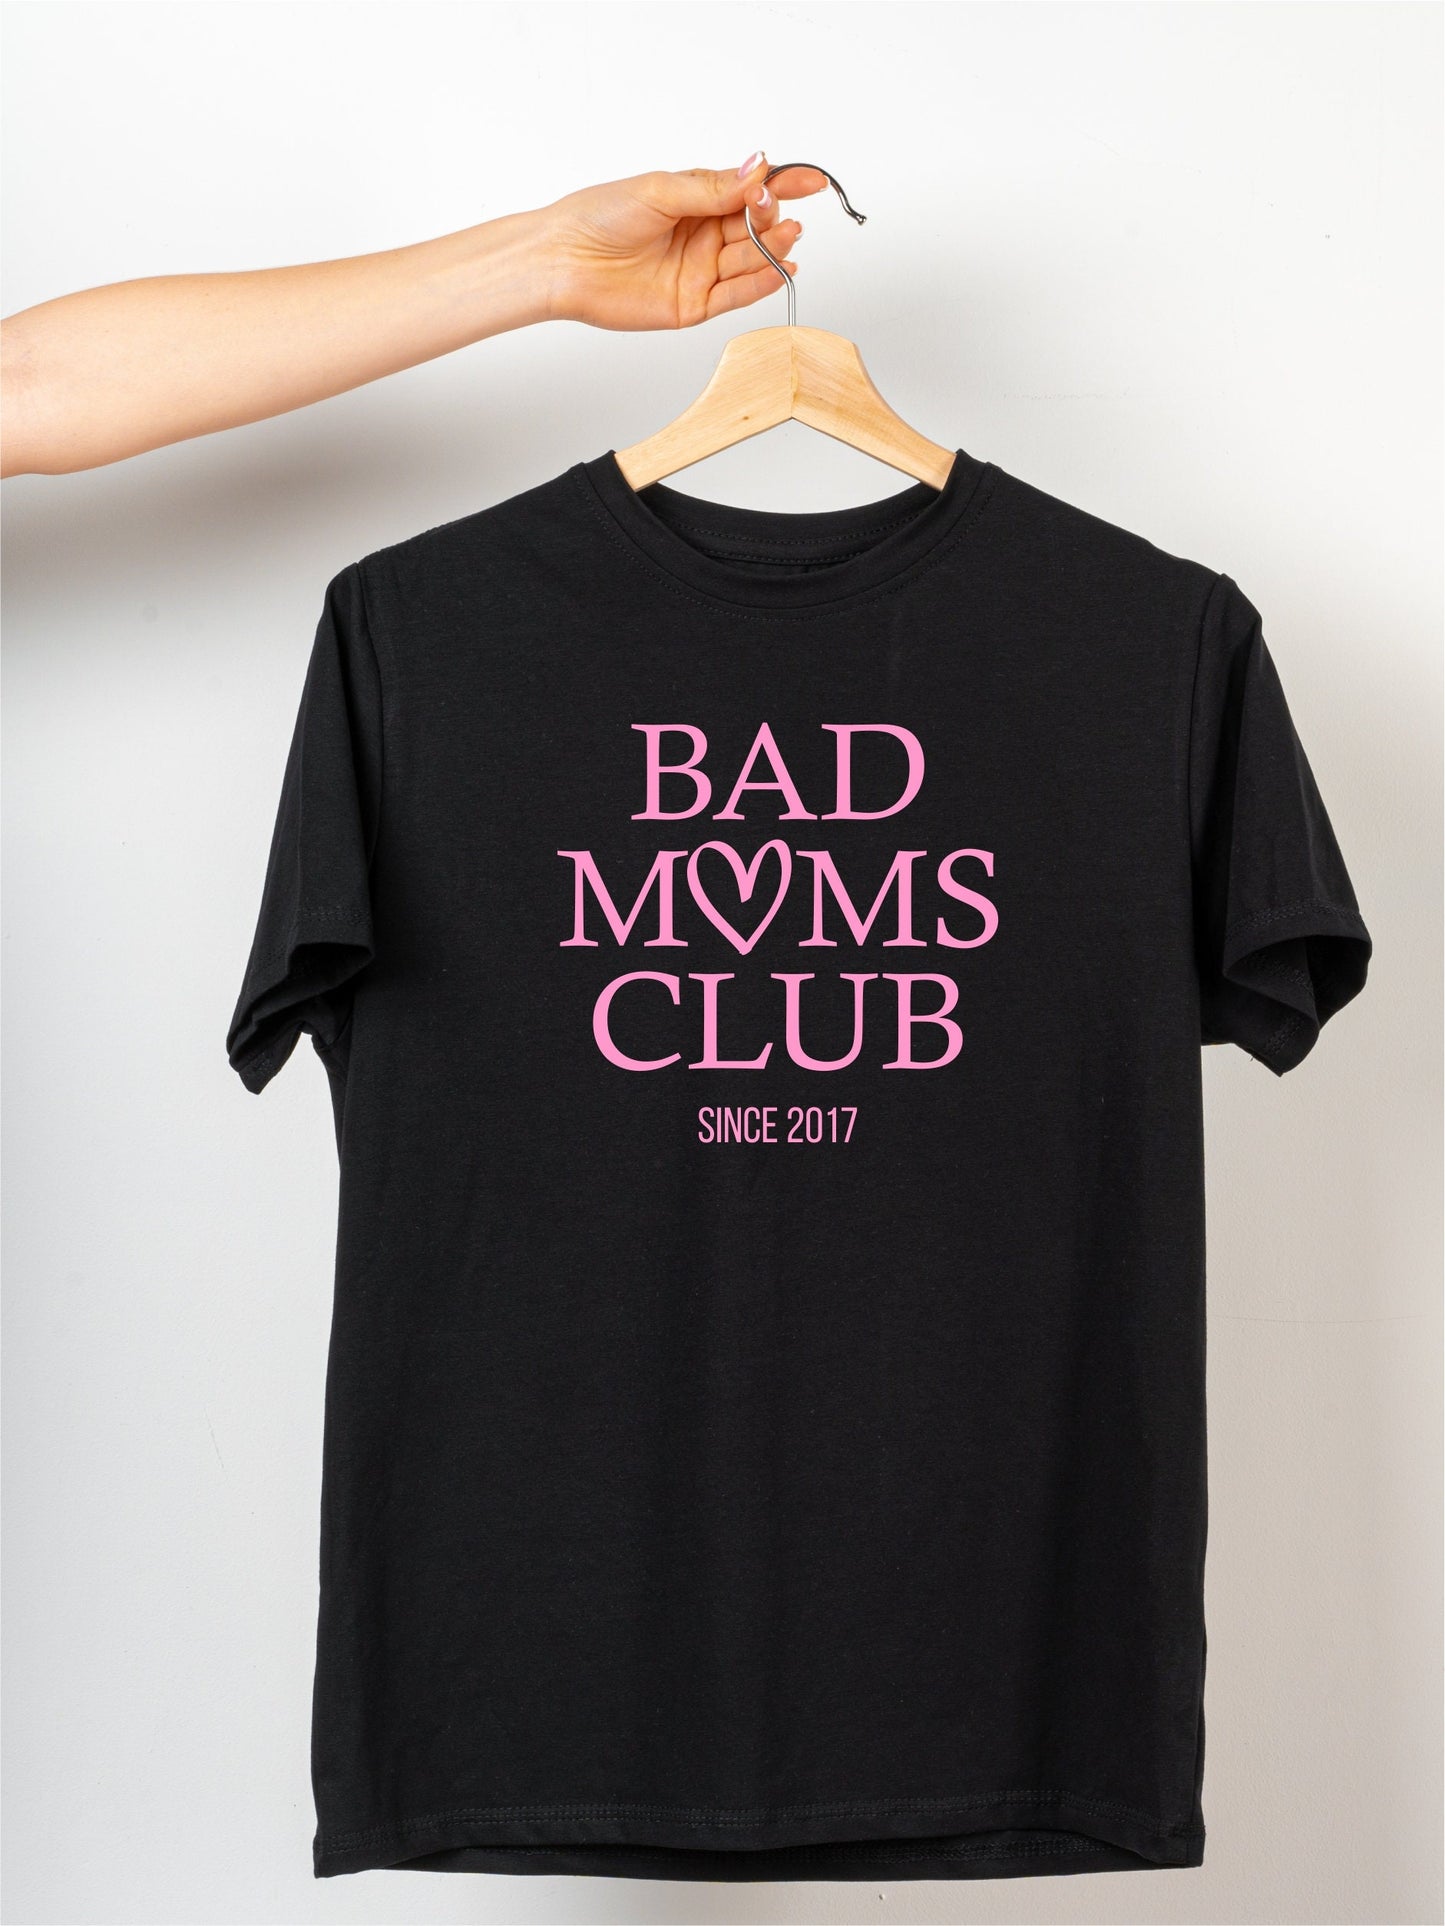 T-Shirt „Bad Moms Club“ mit Name, personalisiert - Cupsandkisses